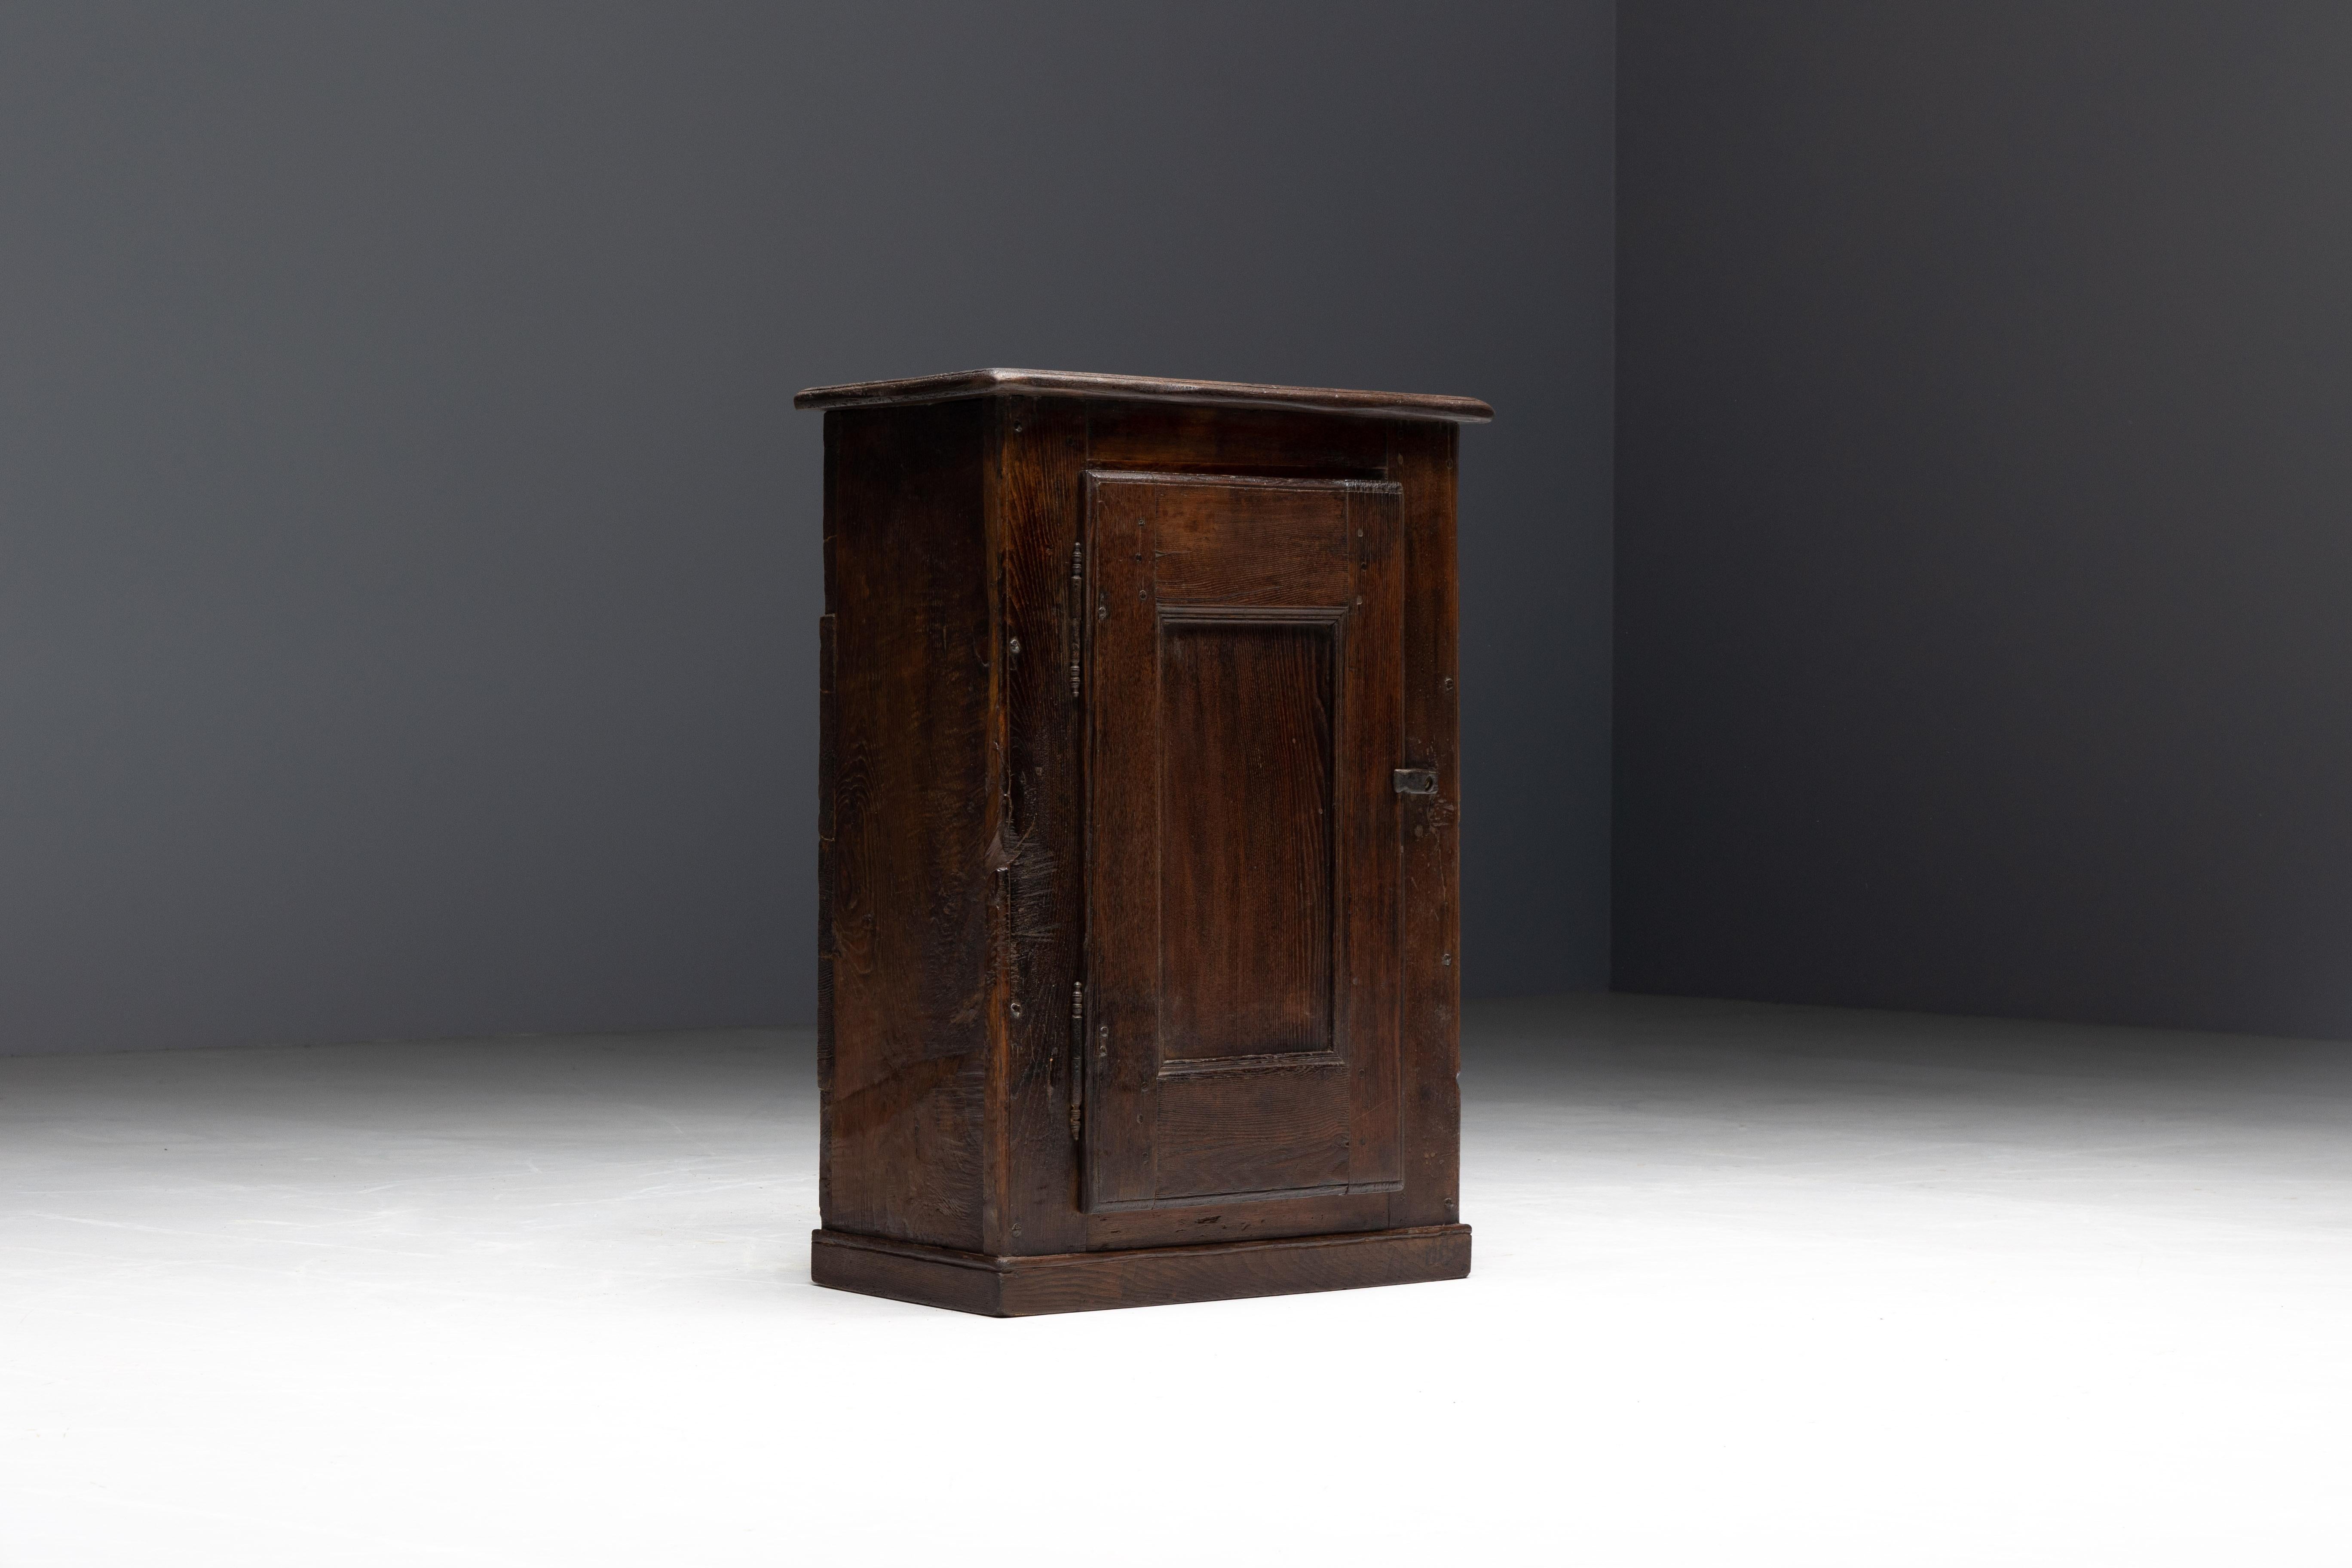 Rustic Art Populaire Cabinet or Confiturier, France, 19th Century In Excellent Condition For Sale In Antwerp, BE